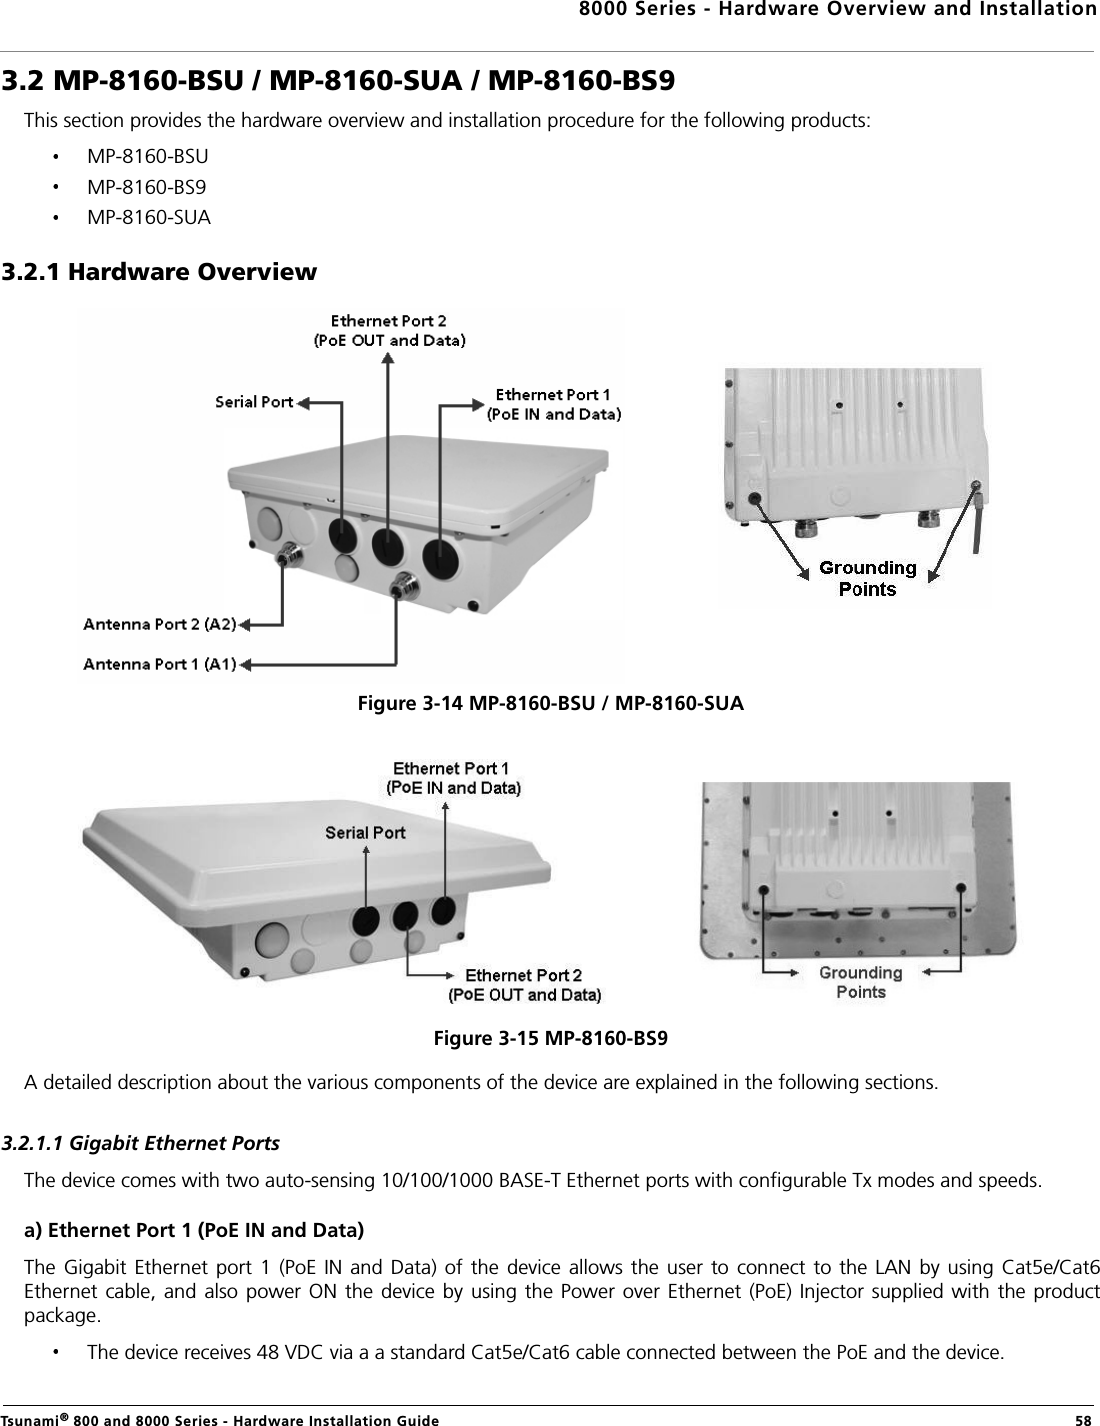 8000 Series - Hardware Overview and InstallationTsunami® 800 and 8000 Series - Hardware Installation Guide  583.2 MP-8160-BSU / MP-8160-SUA / MP-8160-BS9This section provides the hardware overview and installation procedure for the following products: MP-8160-BSUMP-8160-BS9MP-8160-SUA3.2.1 Hardware OverviewFigure 3-14 MP-8160-BSU / MP-8160-SUAFigure 3-15 MP-8160-BS9A detailed description about the various components of the device are explained in the following sections.3.2.1.1 Gigabit Ethernet PortsThe device comes with two auto-sensing 10/100/1000 BASE-T Ethernet ports with configurable Tx modes and speeds.a) Ethernet Port 1 (PoE IN and Data)The  Gigabit  Ethernet  port  1  (PoE  IN  and  Data)  of  the  device allows the user  to  connect  to  the  LAN  by  using  Cat5e/Cat6Ethernet cable, and  also  power  ON  the  device by using the Power over  Ethernet  (PoE)  Injector  supplied with  the productpackage.The device receives 48 VDC via a a standard Cat5e/Cat6 cable connected between the PoE and the device.